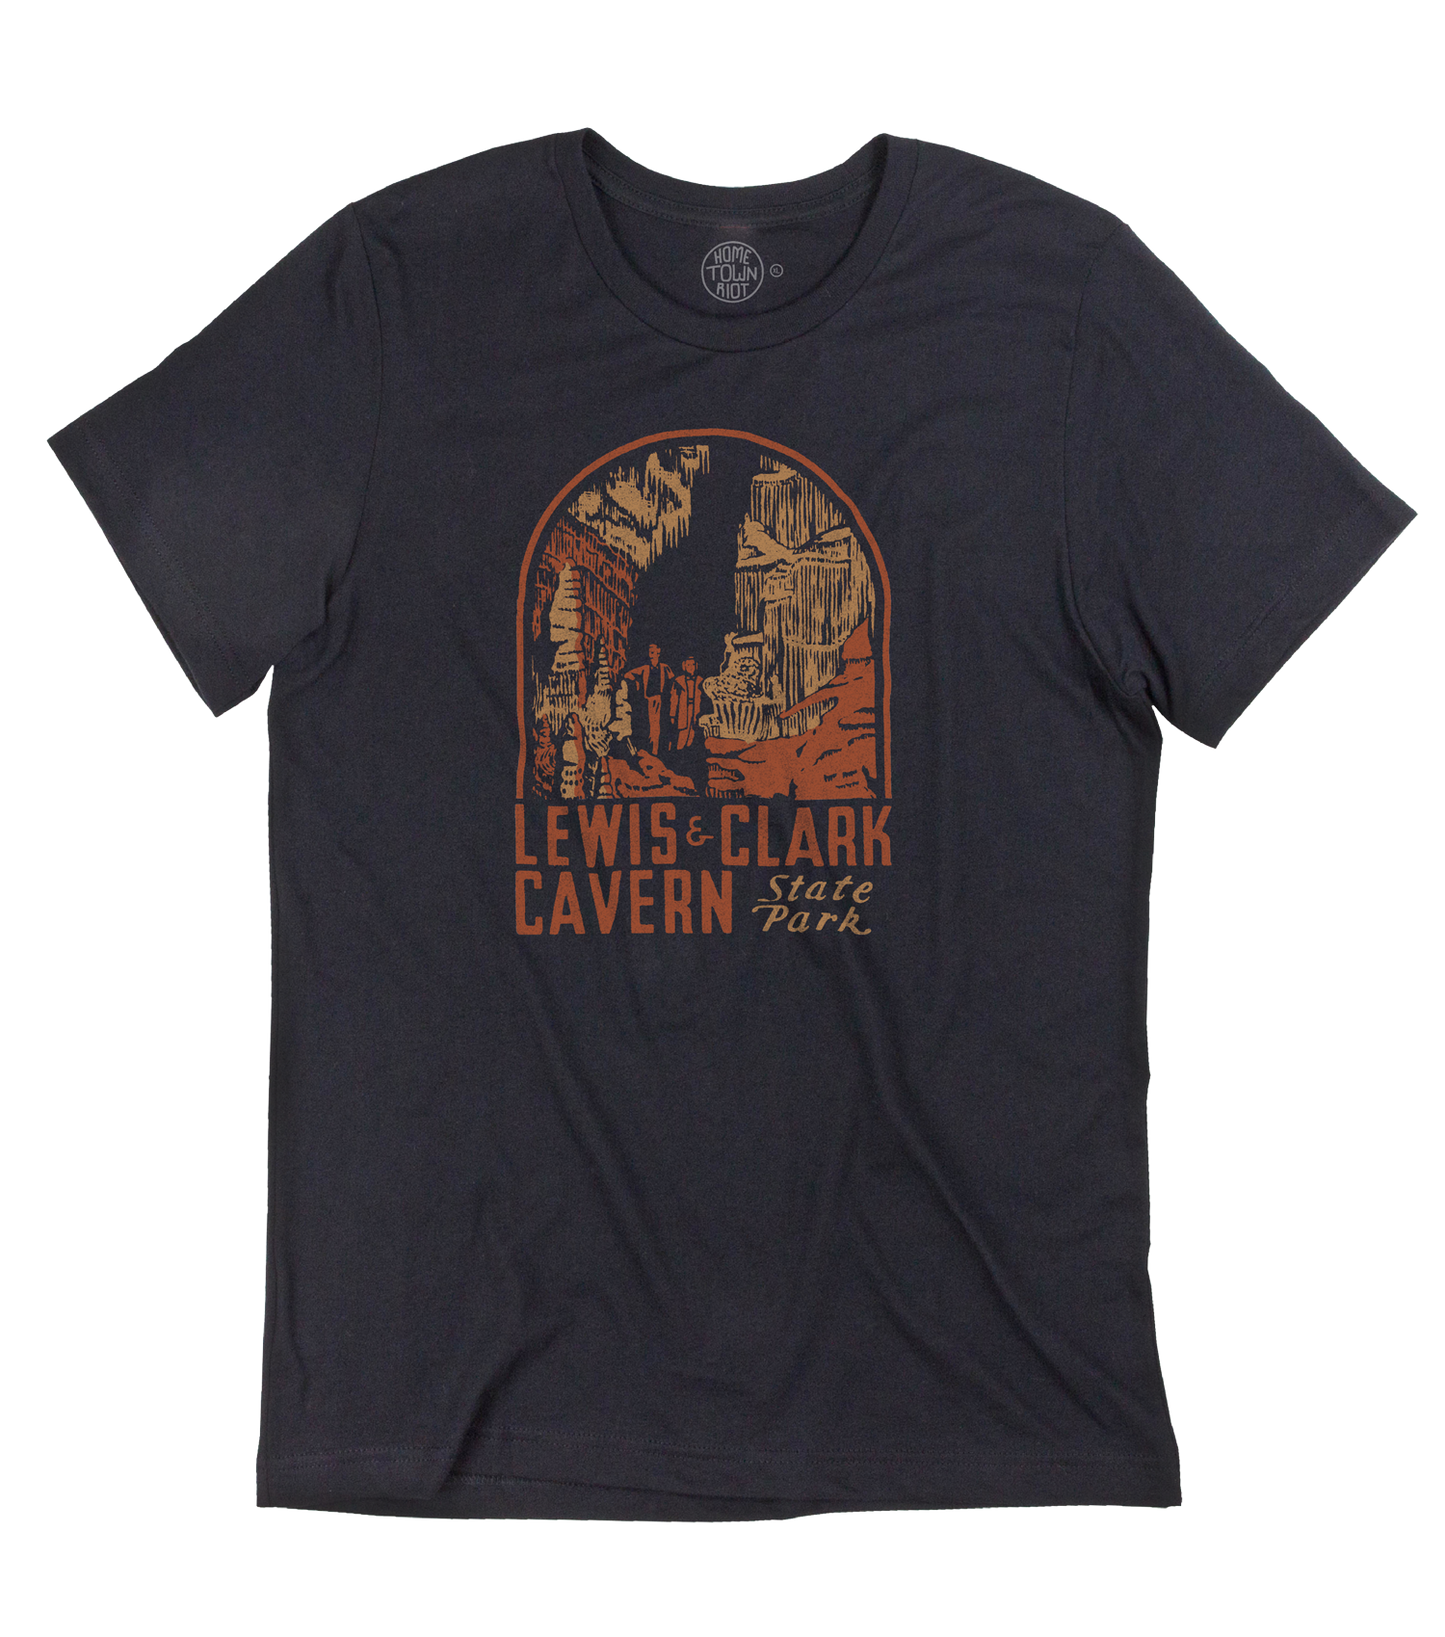 Lewis and Clark Cavern State Park Shirt - HomeTownRiot